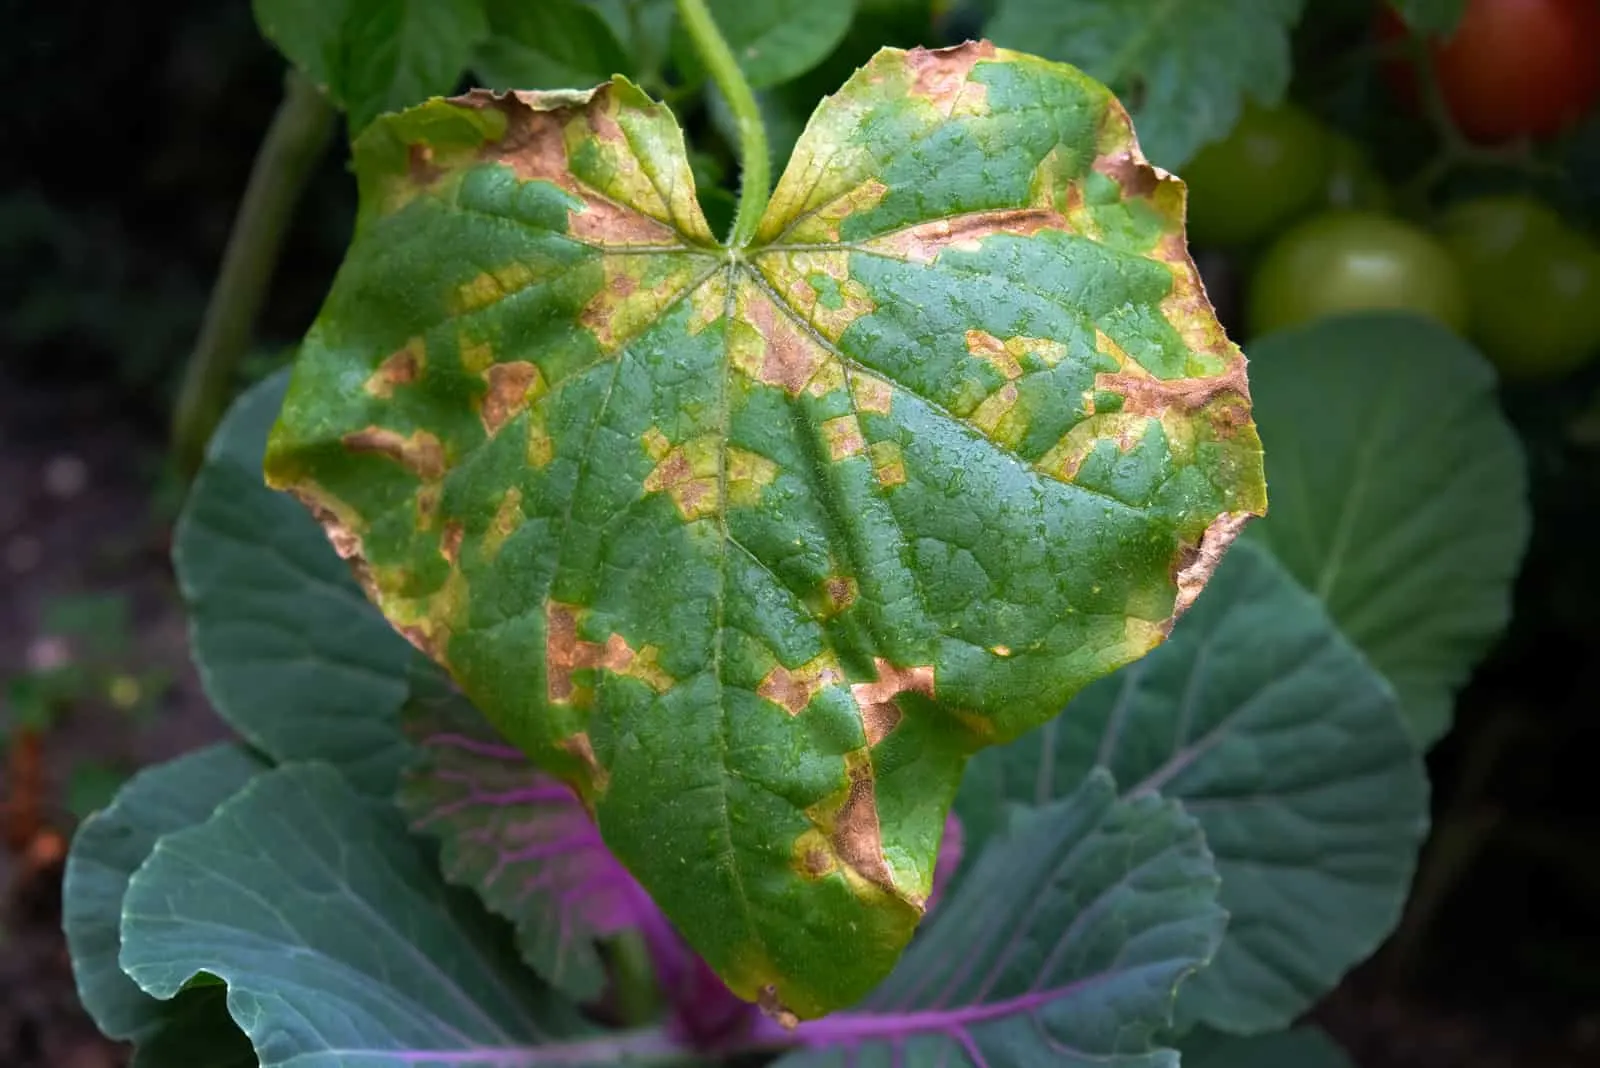 Yellow spots on the leaves of cucumbers